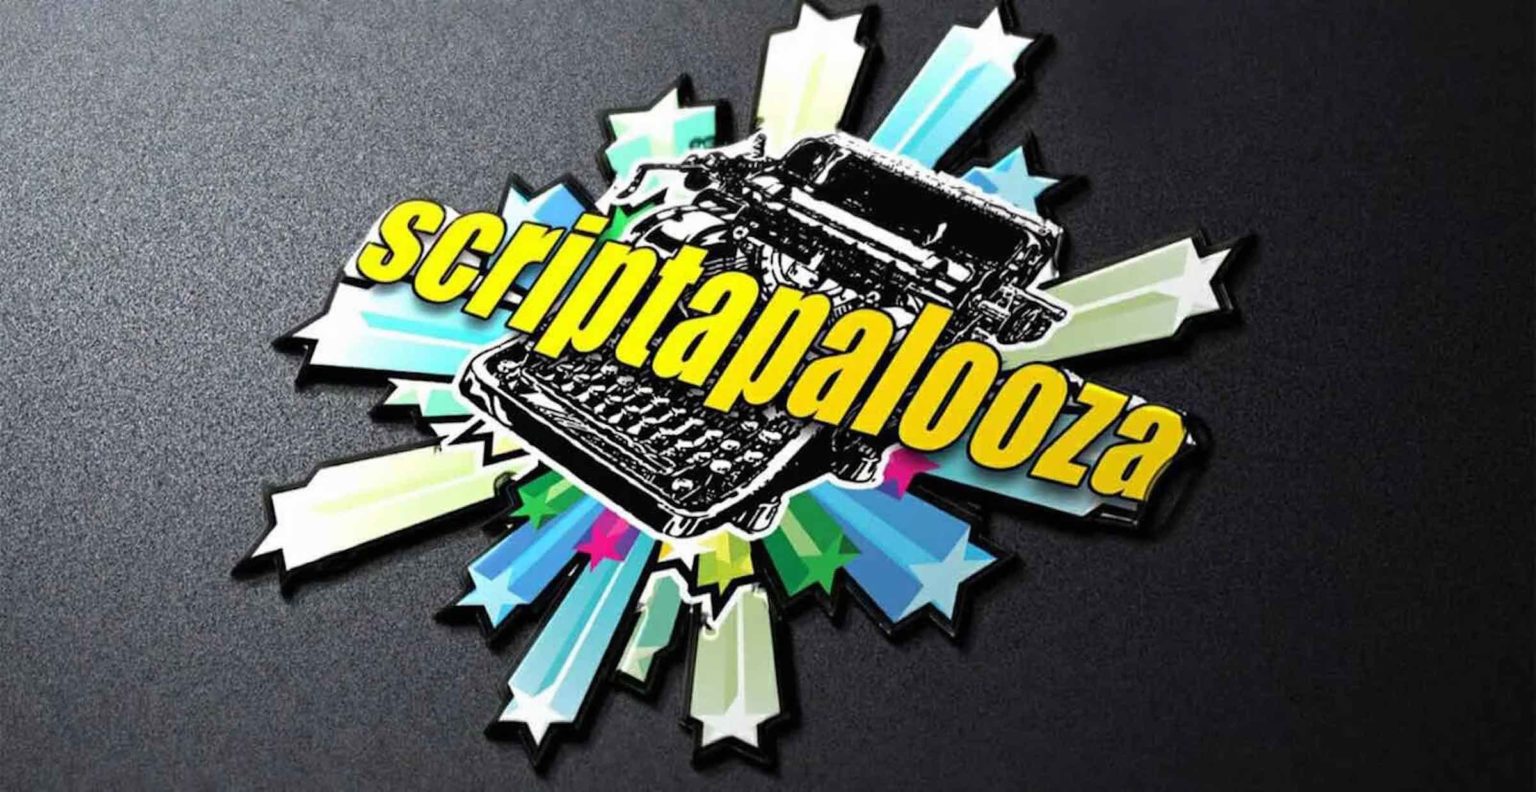 Scriptapalooza is the perfect screenwriting prize this quarantine. Here’s a brief list of why this is the competition for you.